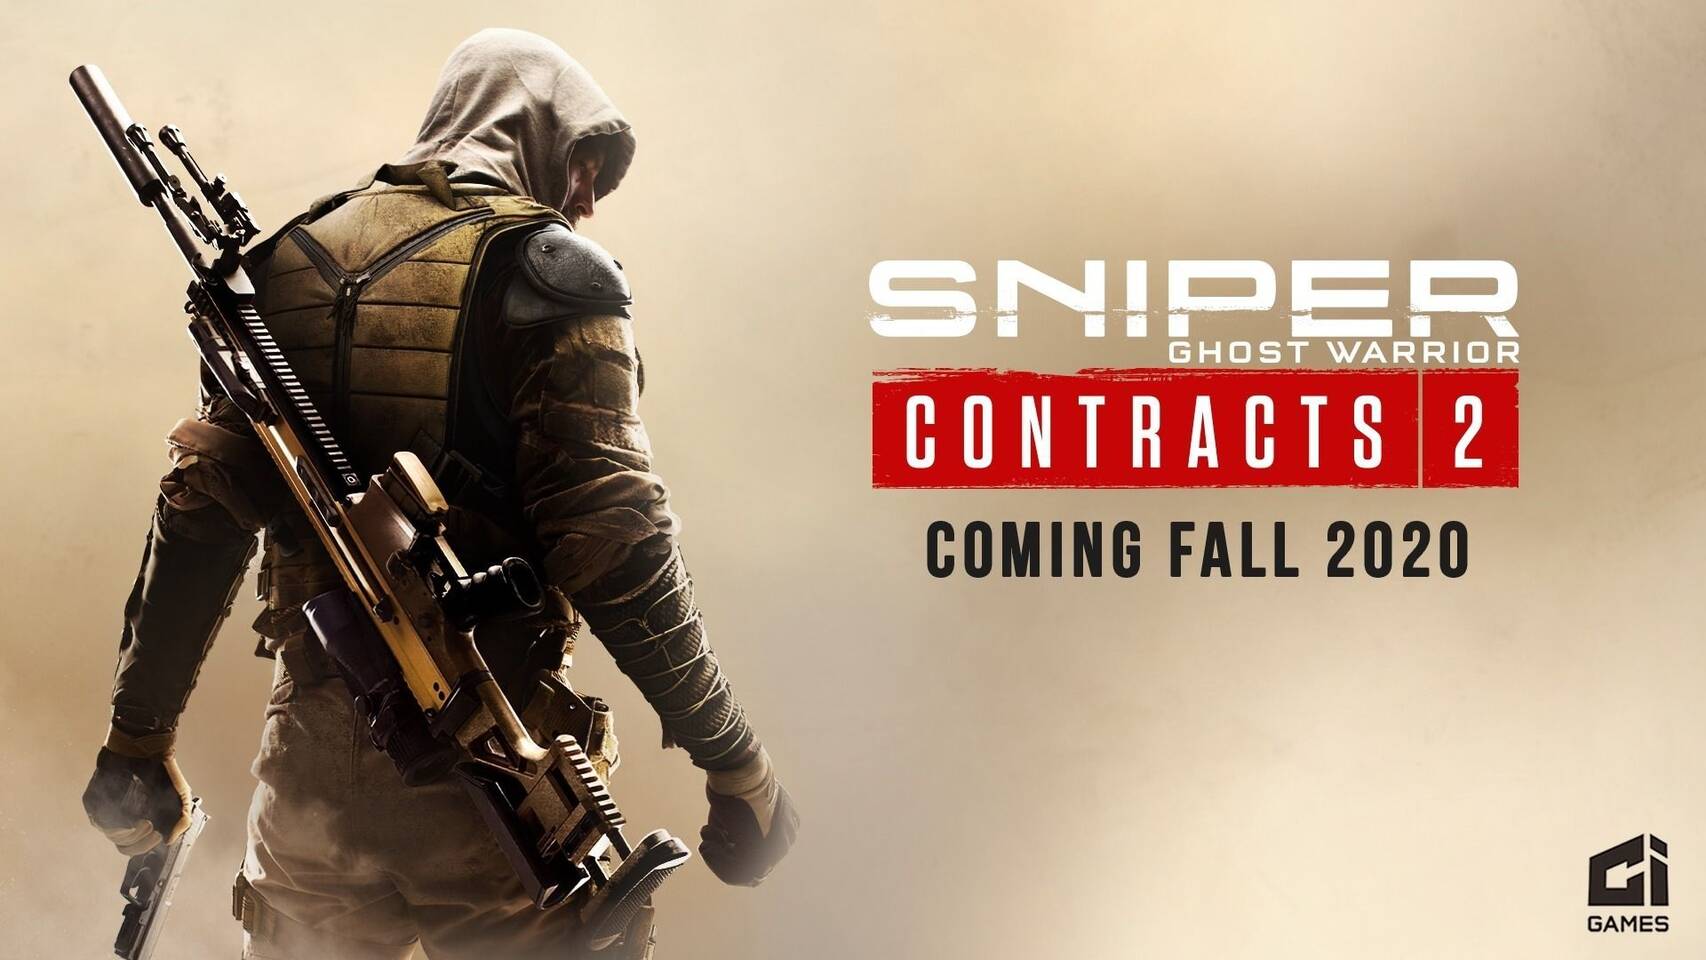 Sniper ghost warrior contracts 2
